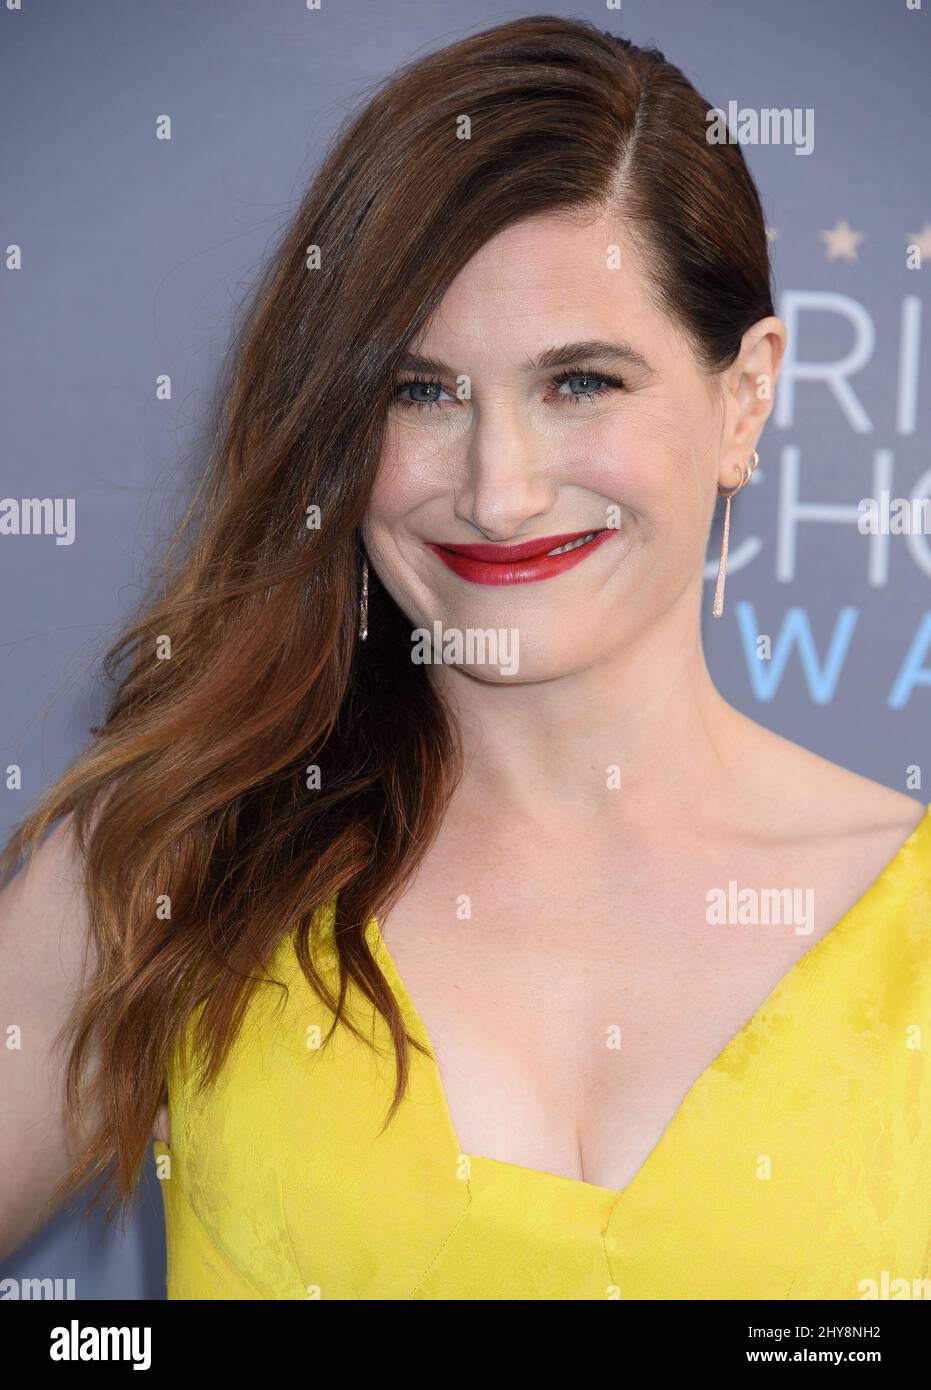 Kathryn Hahn attends the 21st Annual Critics' Choice Awards held at Barker Hanger at the Santa Monica Airport Stock Photo